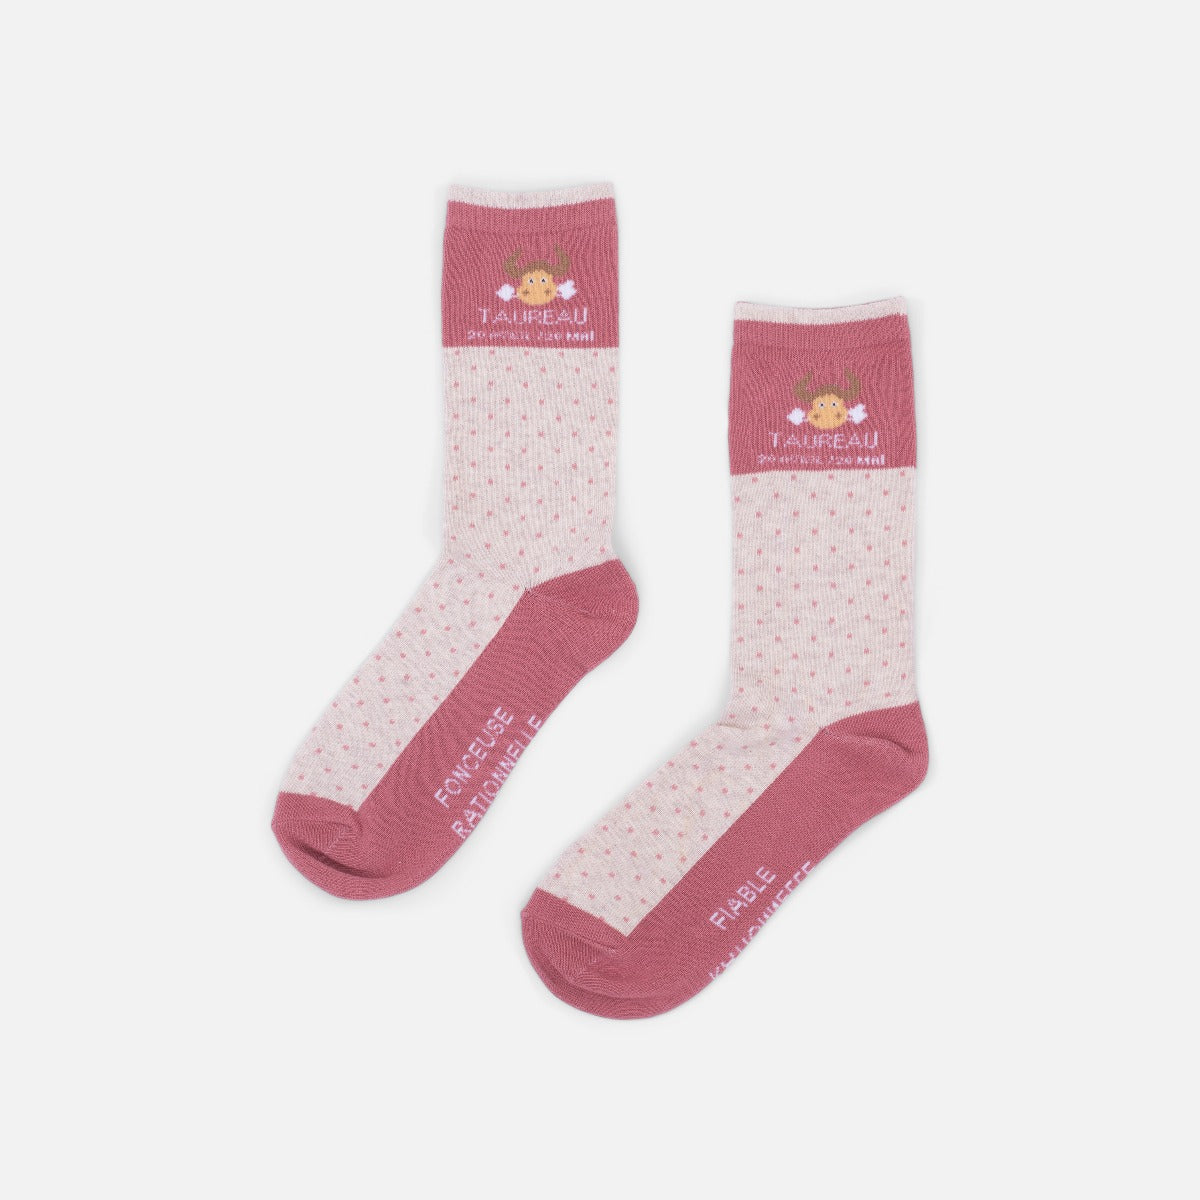 Beige and pink socks astrological sign "taurus"